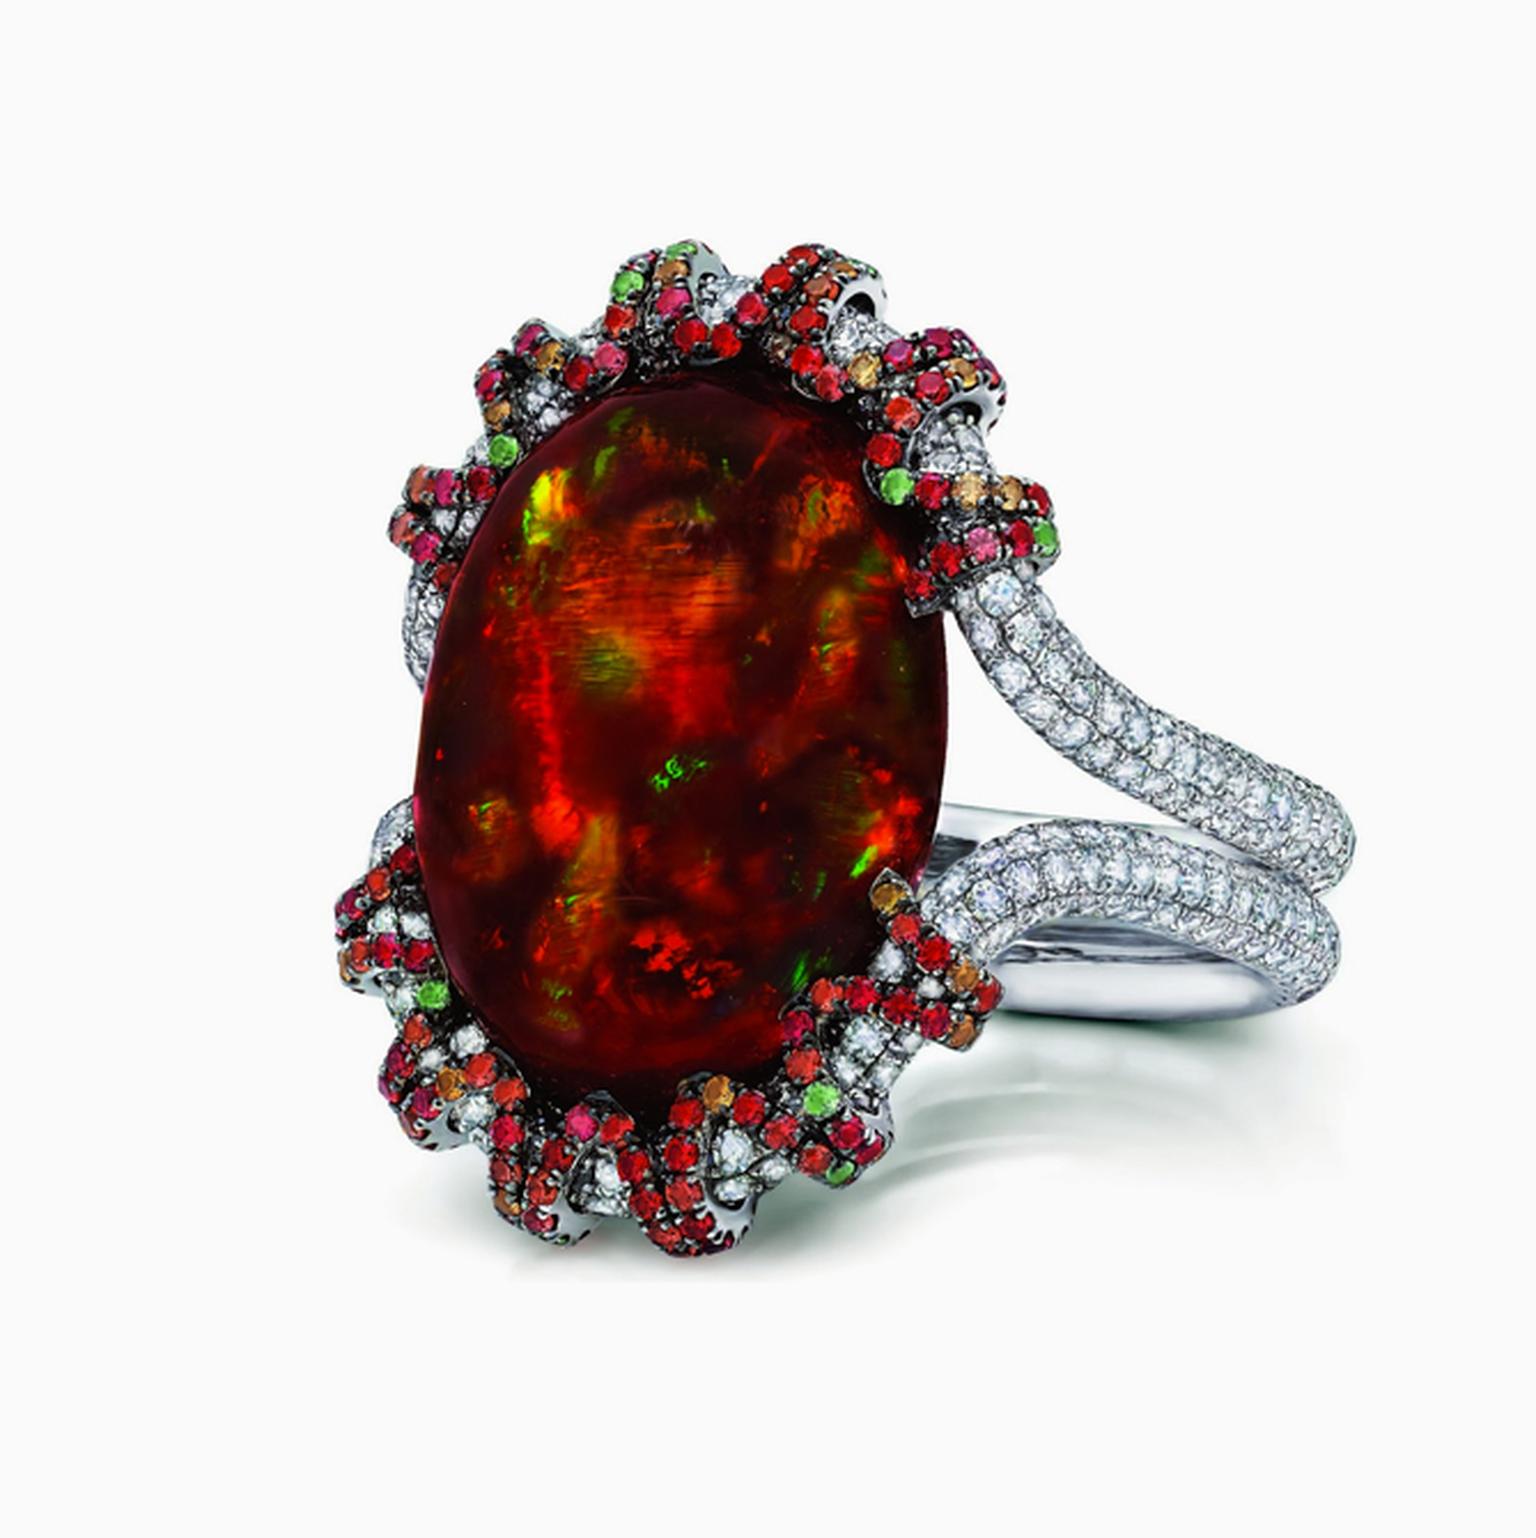 Martin Katz white gold ring featuring a central 13.18ct fire opal cabochon, micro-set with diamonds, tsavorite garnets and orange-red sapphires.